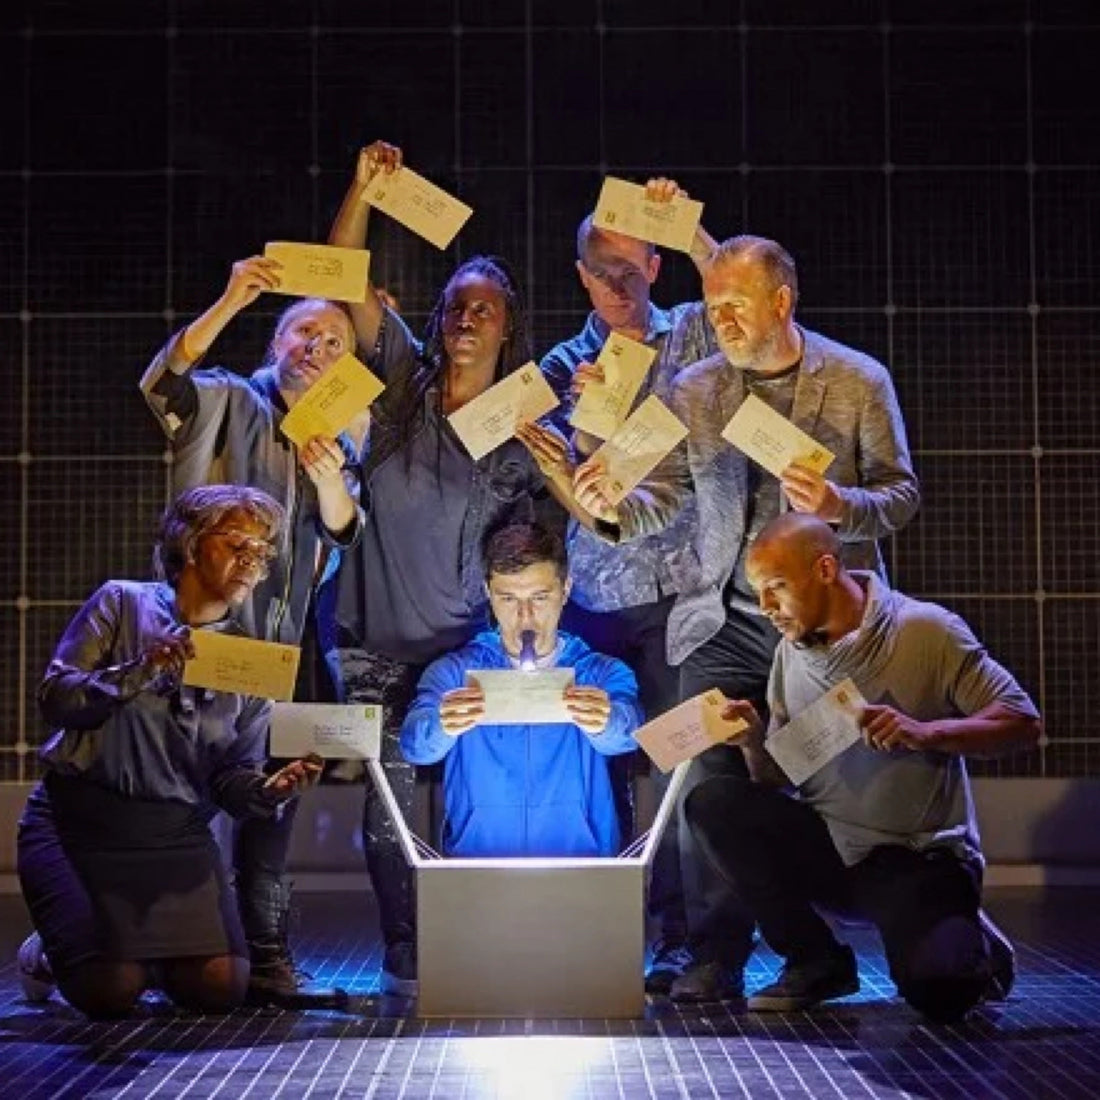 Returning to the Grand Opera House: The Curious Incident of the Dog in the Night-Time.